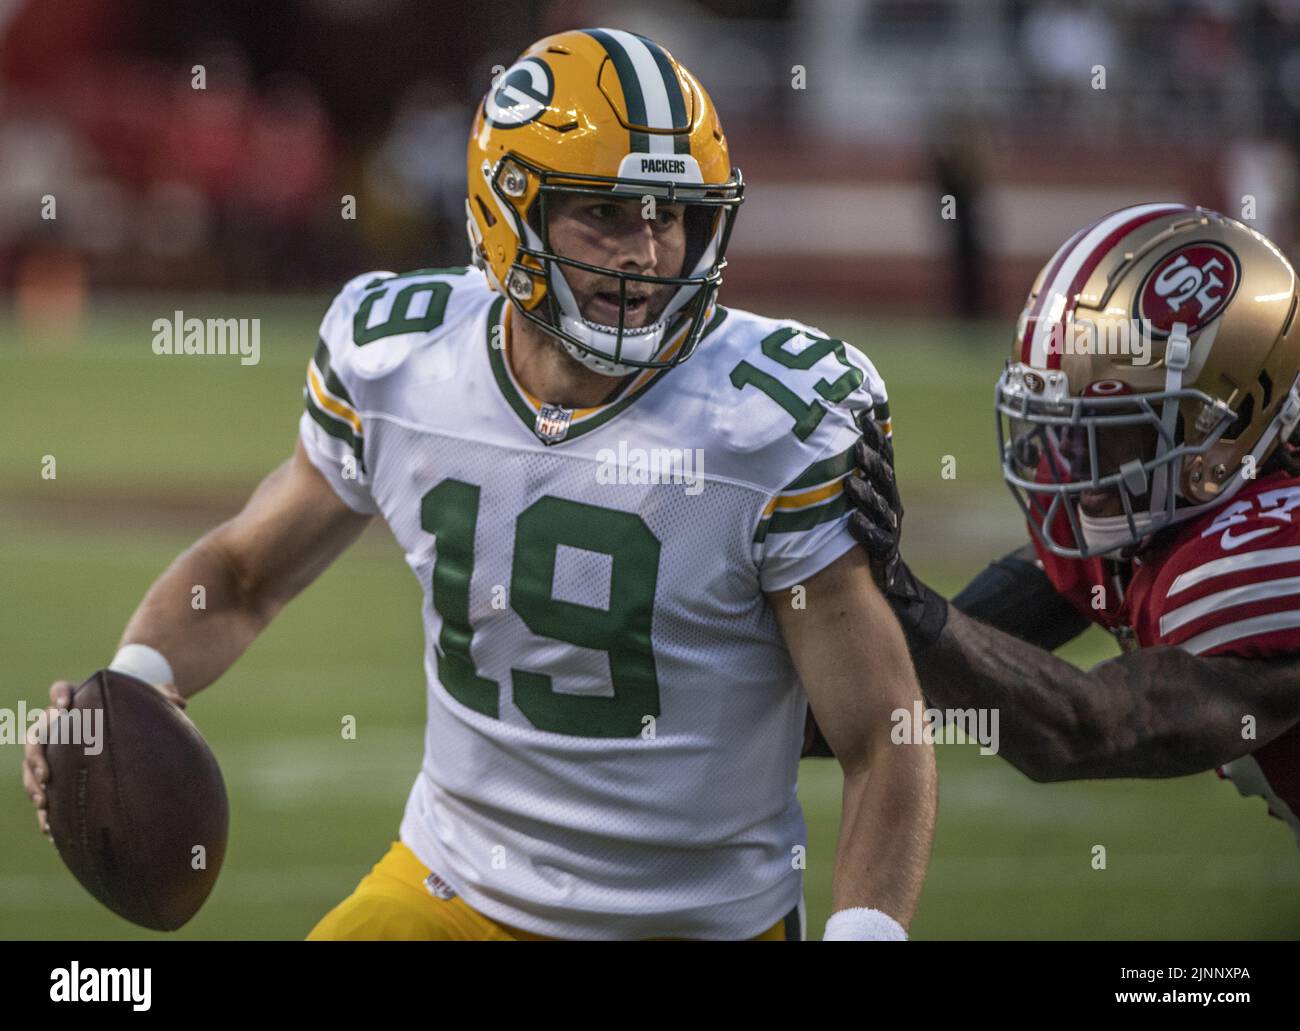 Santa Clara, USA. 13th Aug, 2022. Green Bay Packers quarterback Danny Etling (19) is pushed out of bounds by the San Francisco 49ers in the third quarter at Levi's Stadium in Santa Clara, California on Friday, August 12, 2022. The 49ers defeated the Packers 28-21 in their first preseason game Photo by Terry Schmitt/UPI Credit: UPI/Alamy Live News Stock Photo